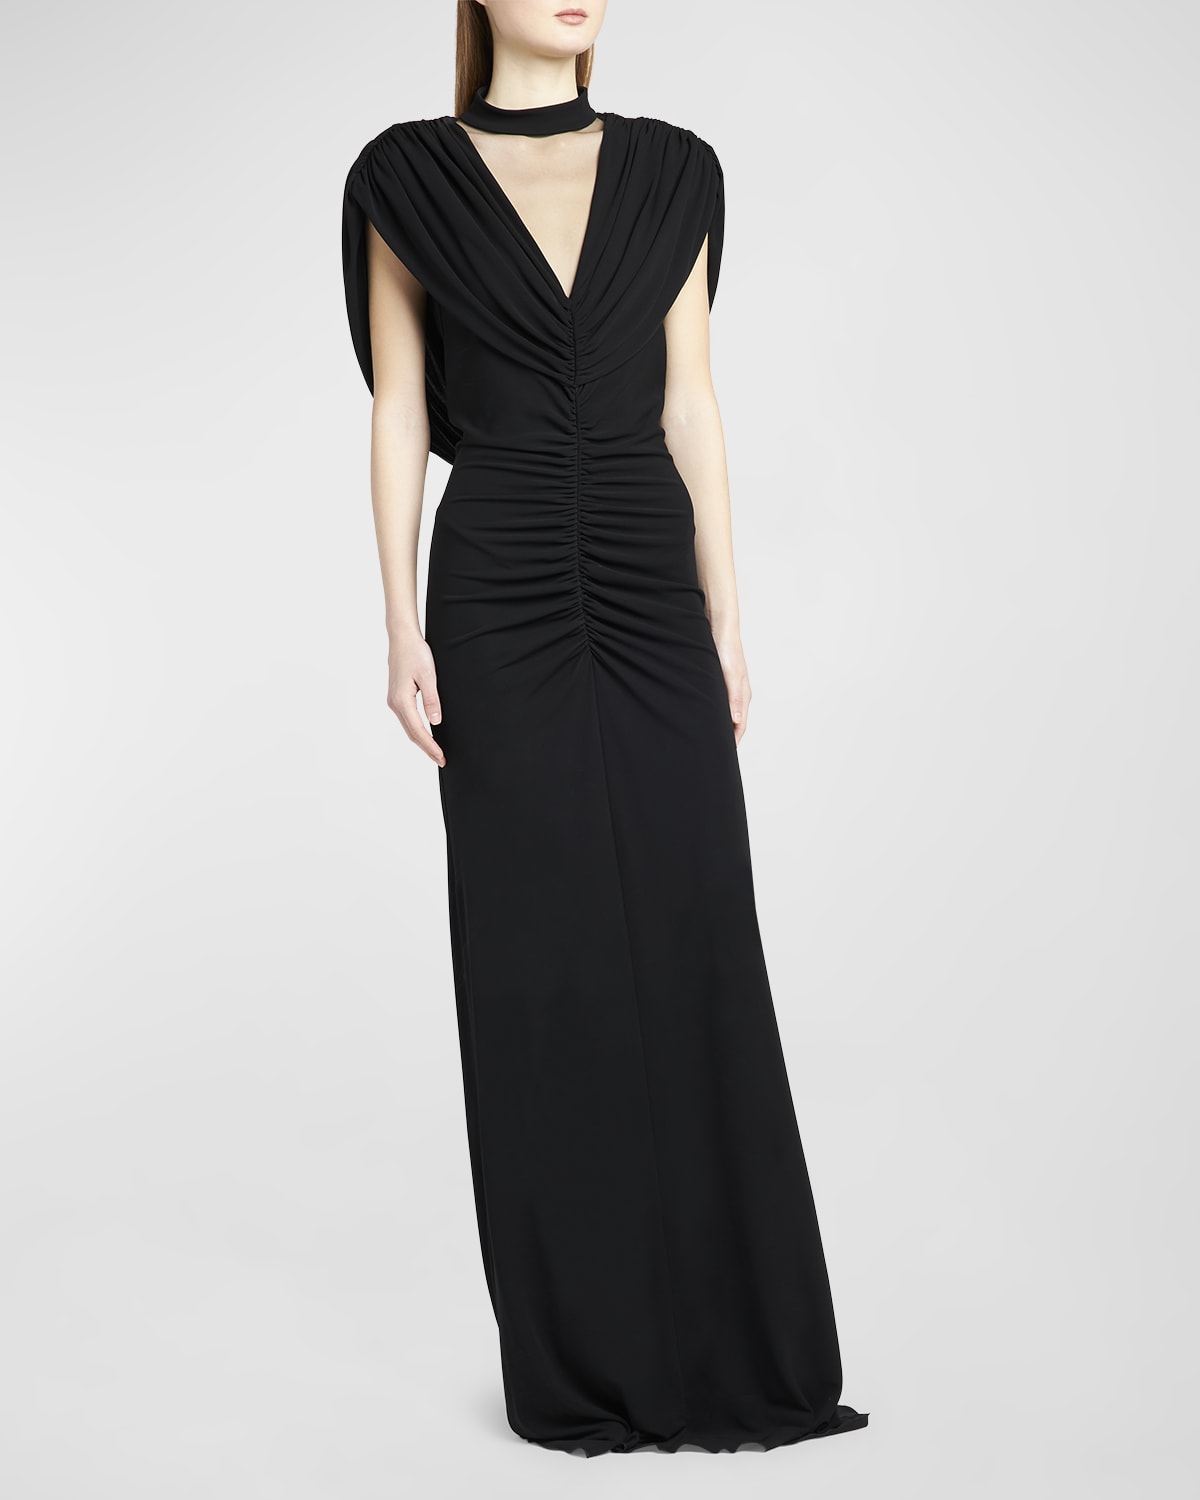 Draped Open-Back Illusion Gown